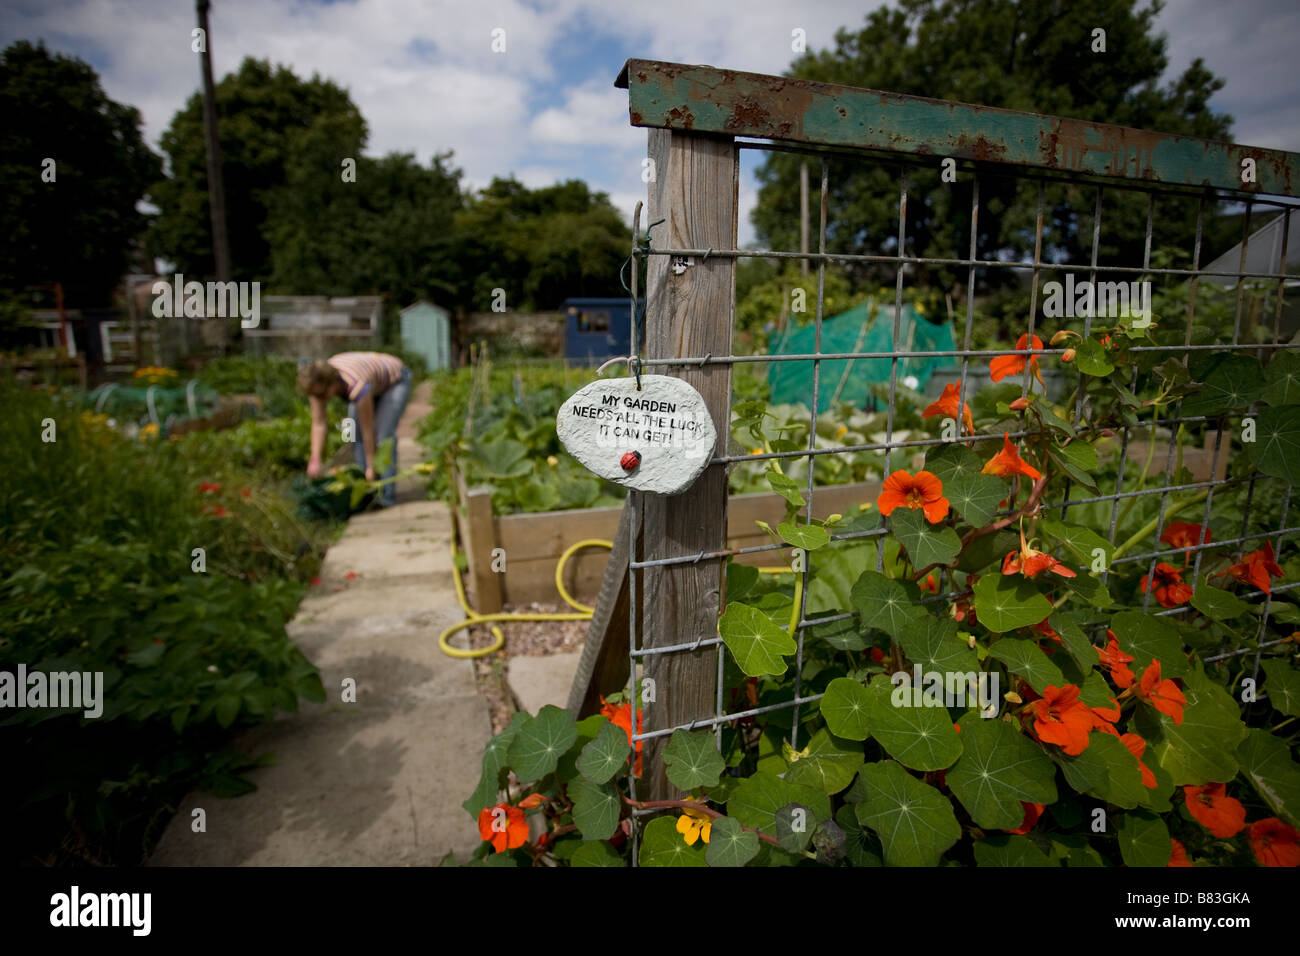 Woman working in allotment with  raised beds nasturtiums and sign saying my garden needs all the luck it can get Stock Photo